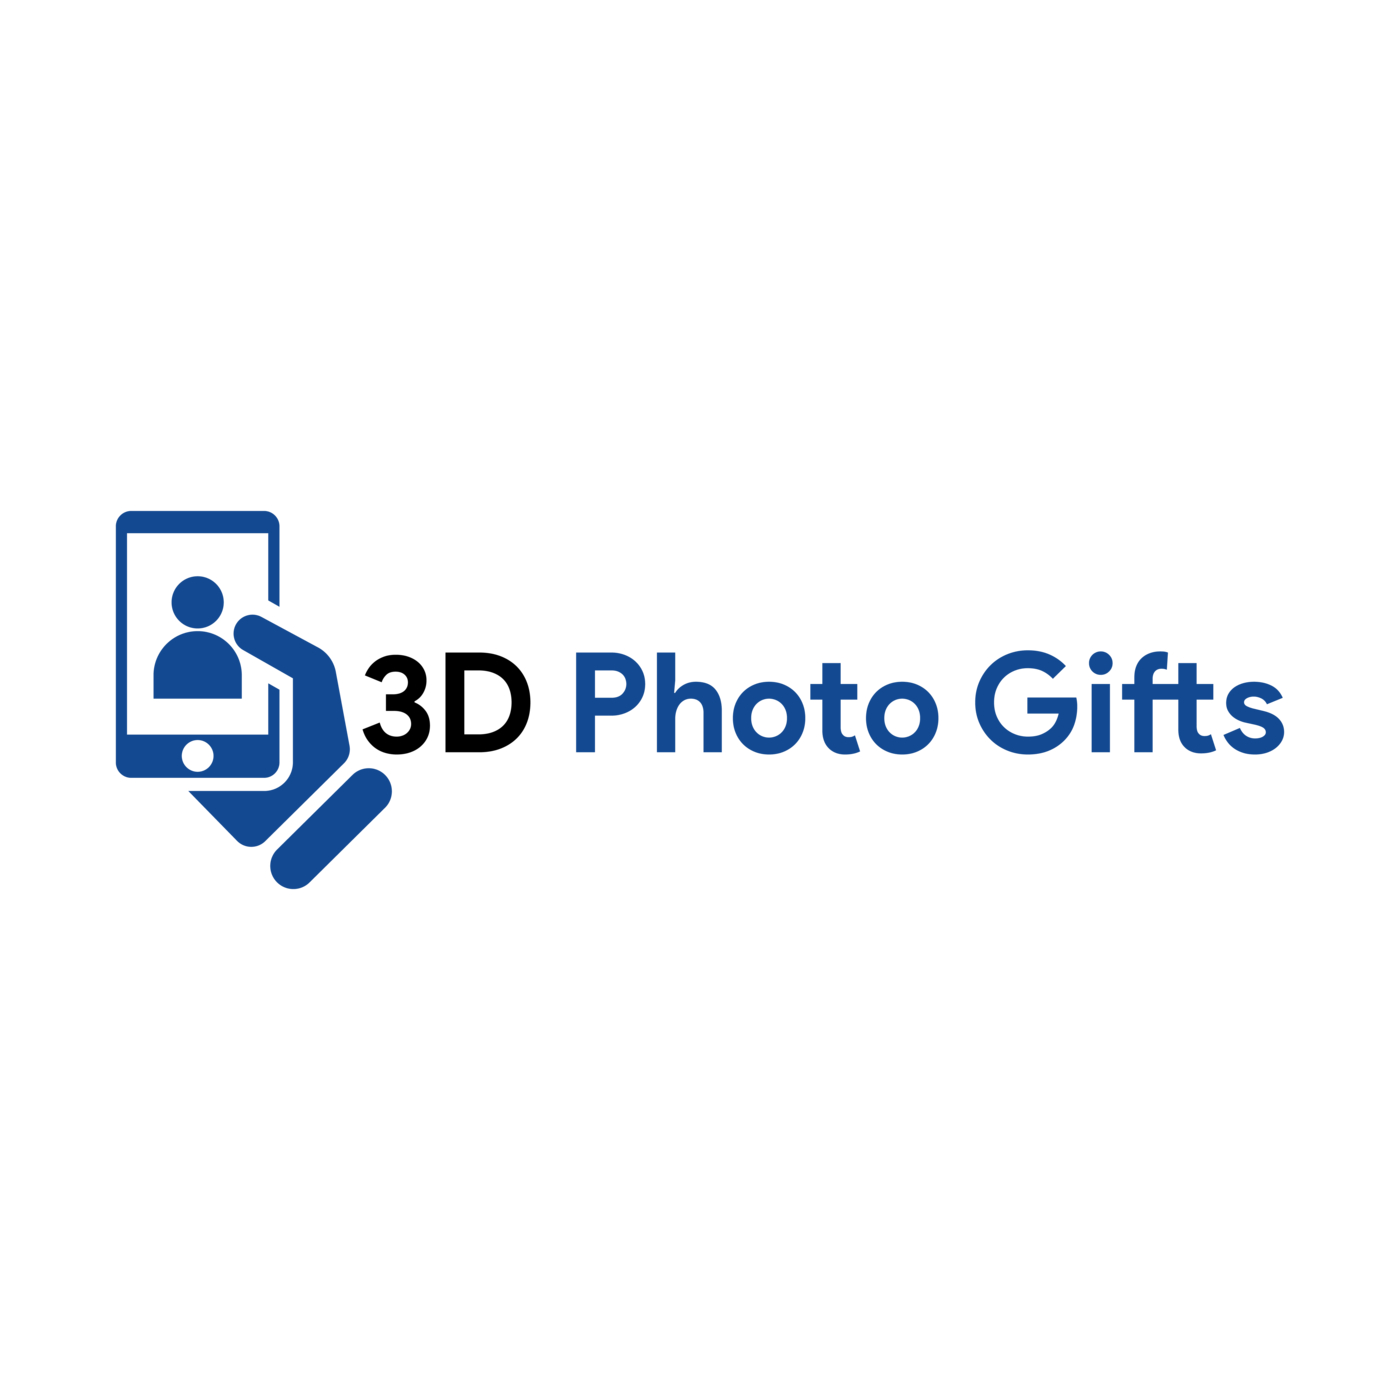 3D Photo Gifts